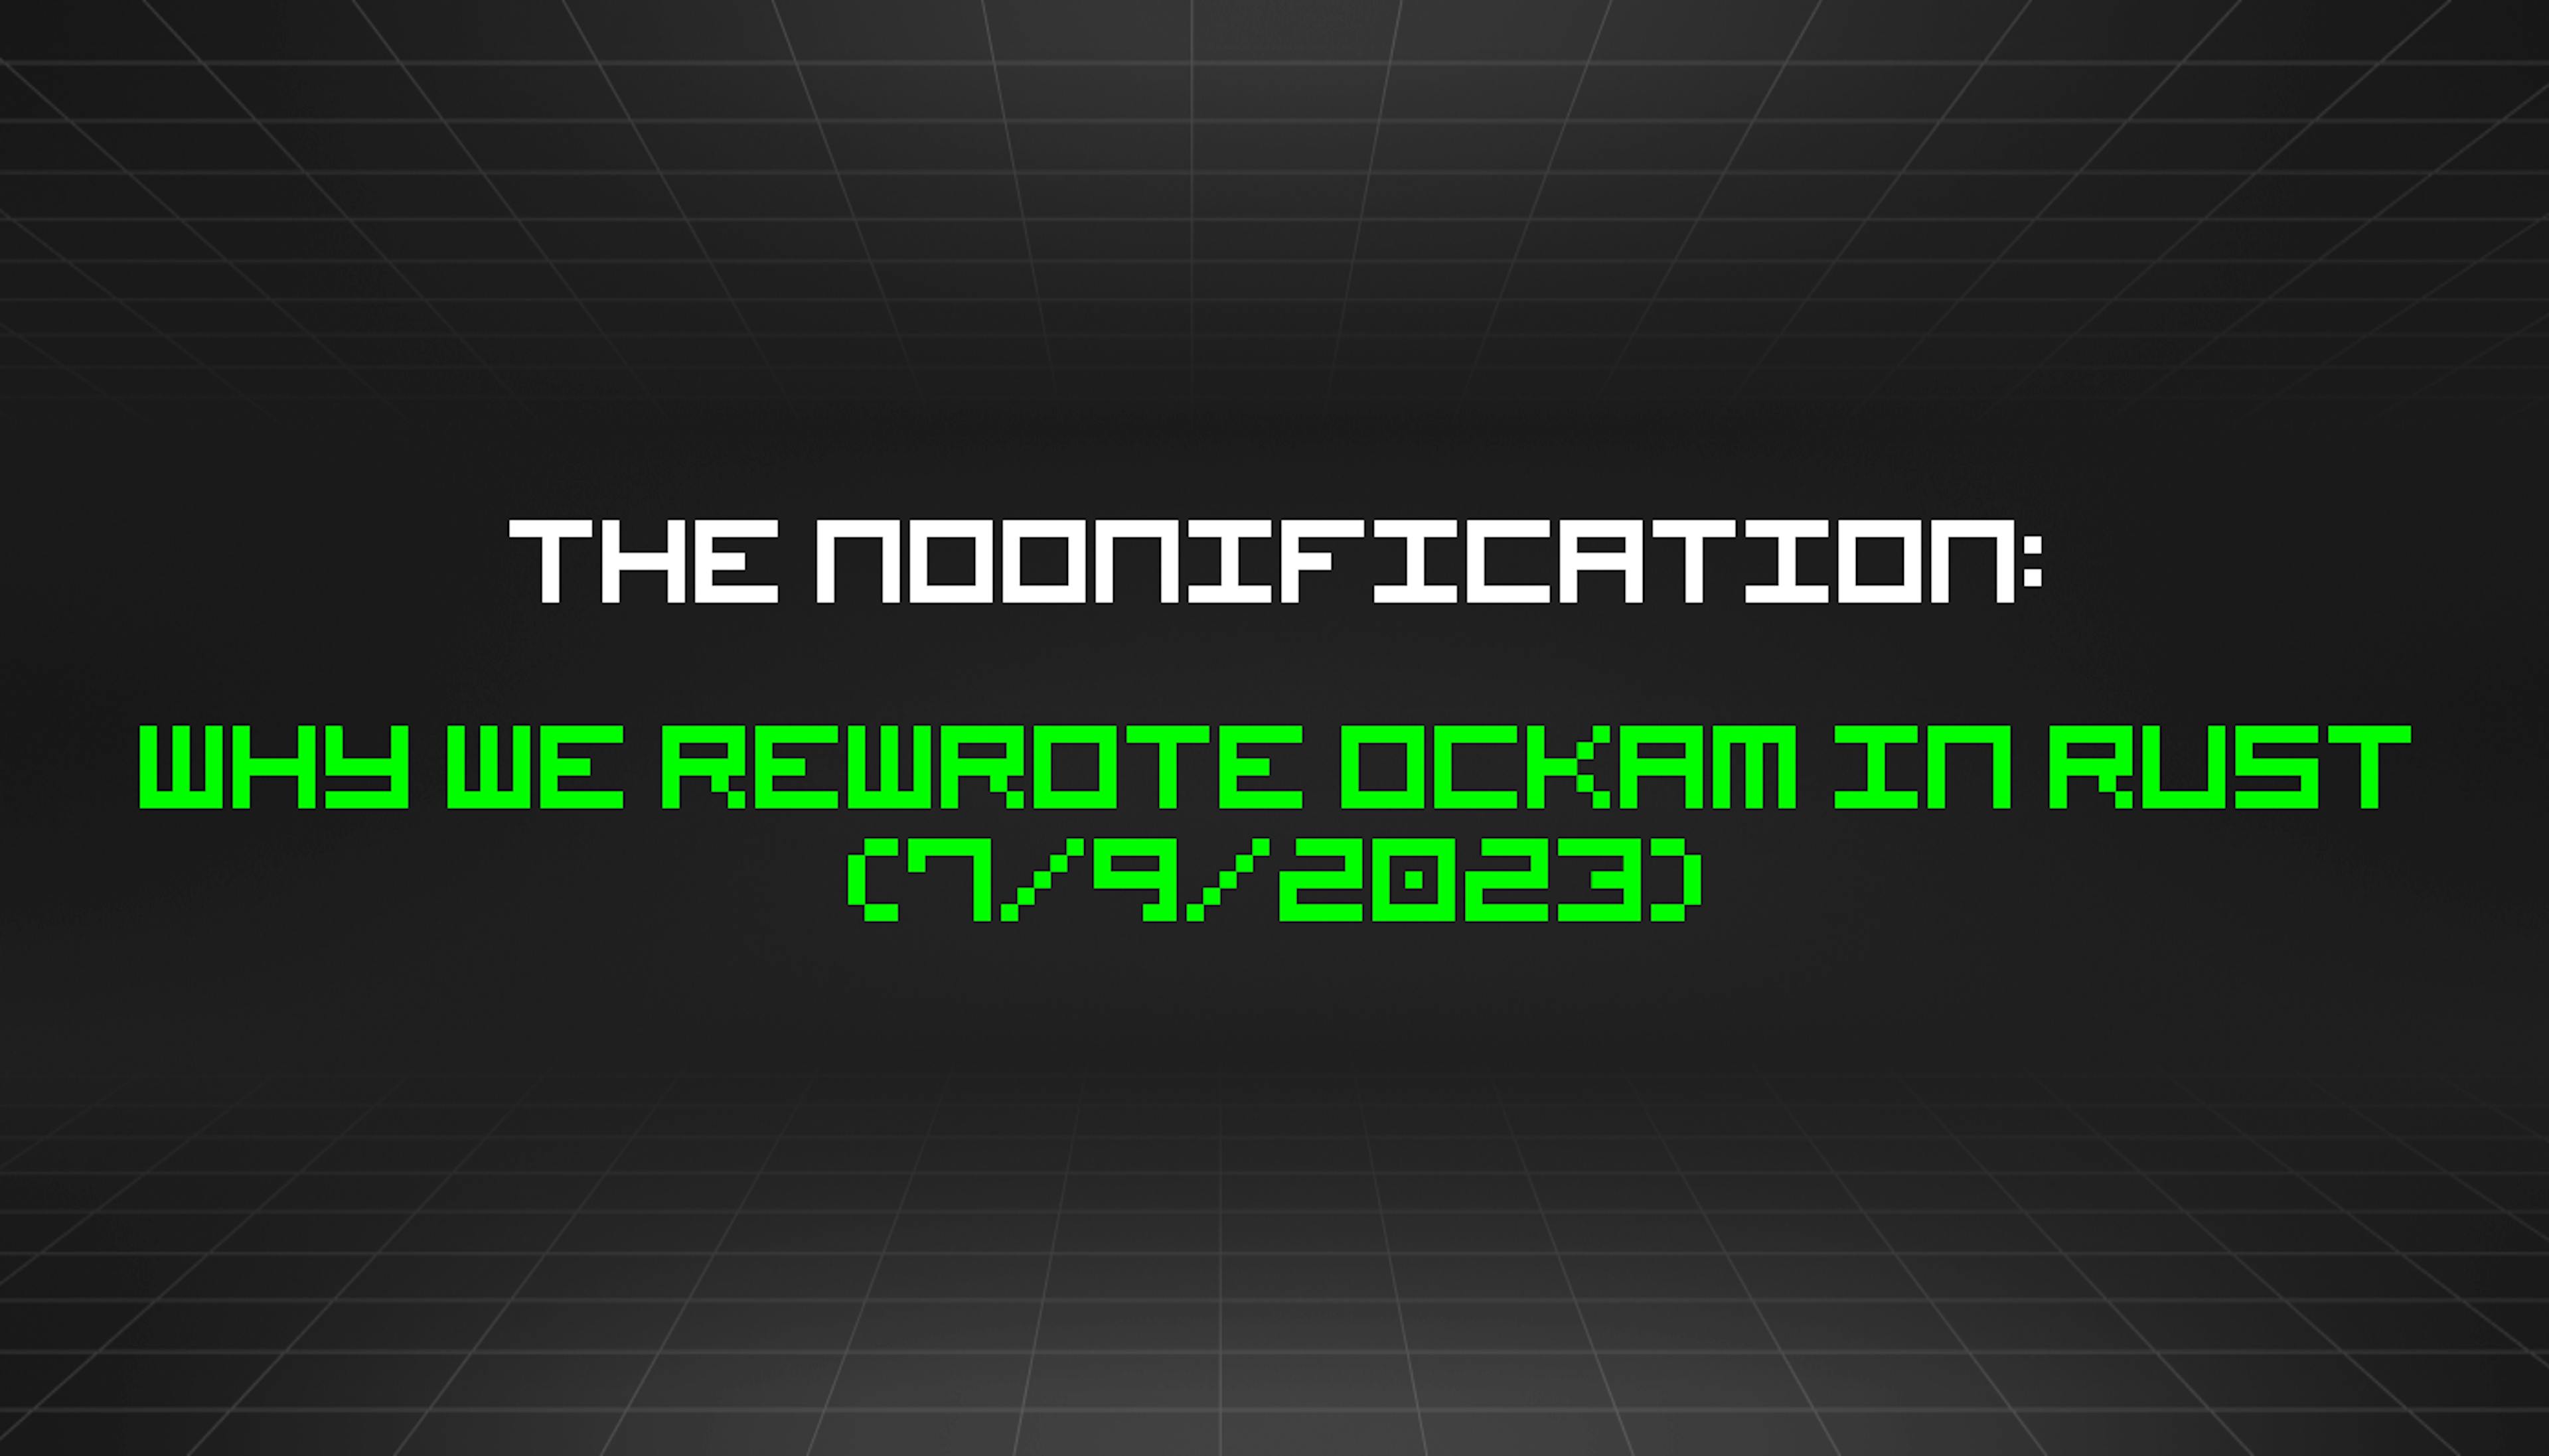 featured image - The Noonification: Why We Rewrote Ockam in Rust (7/9/2023)